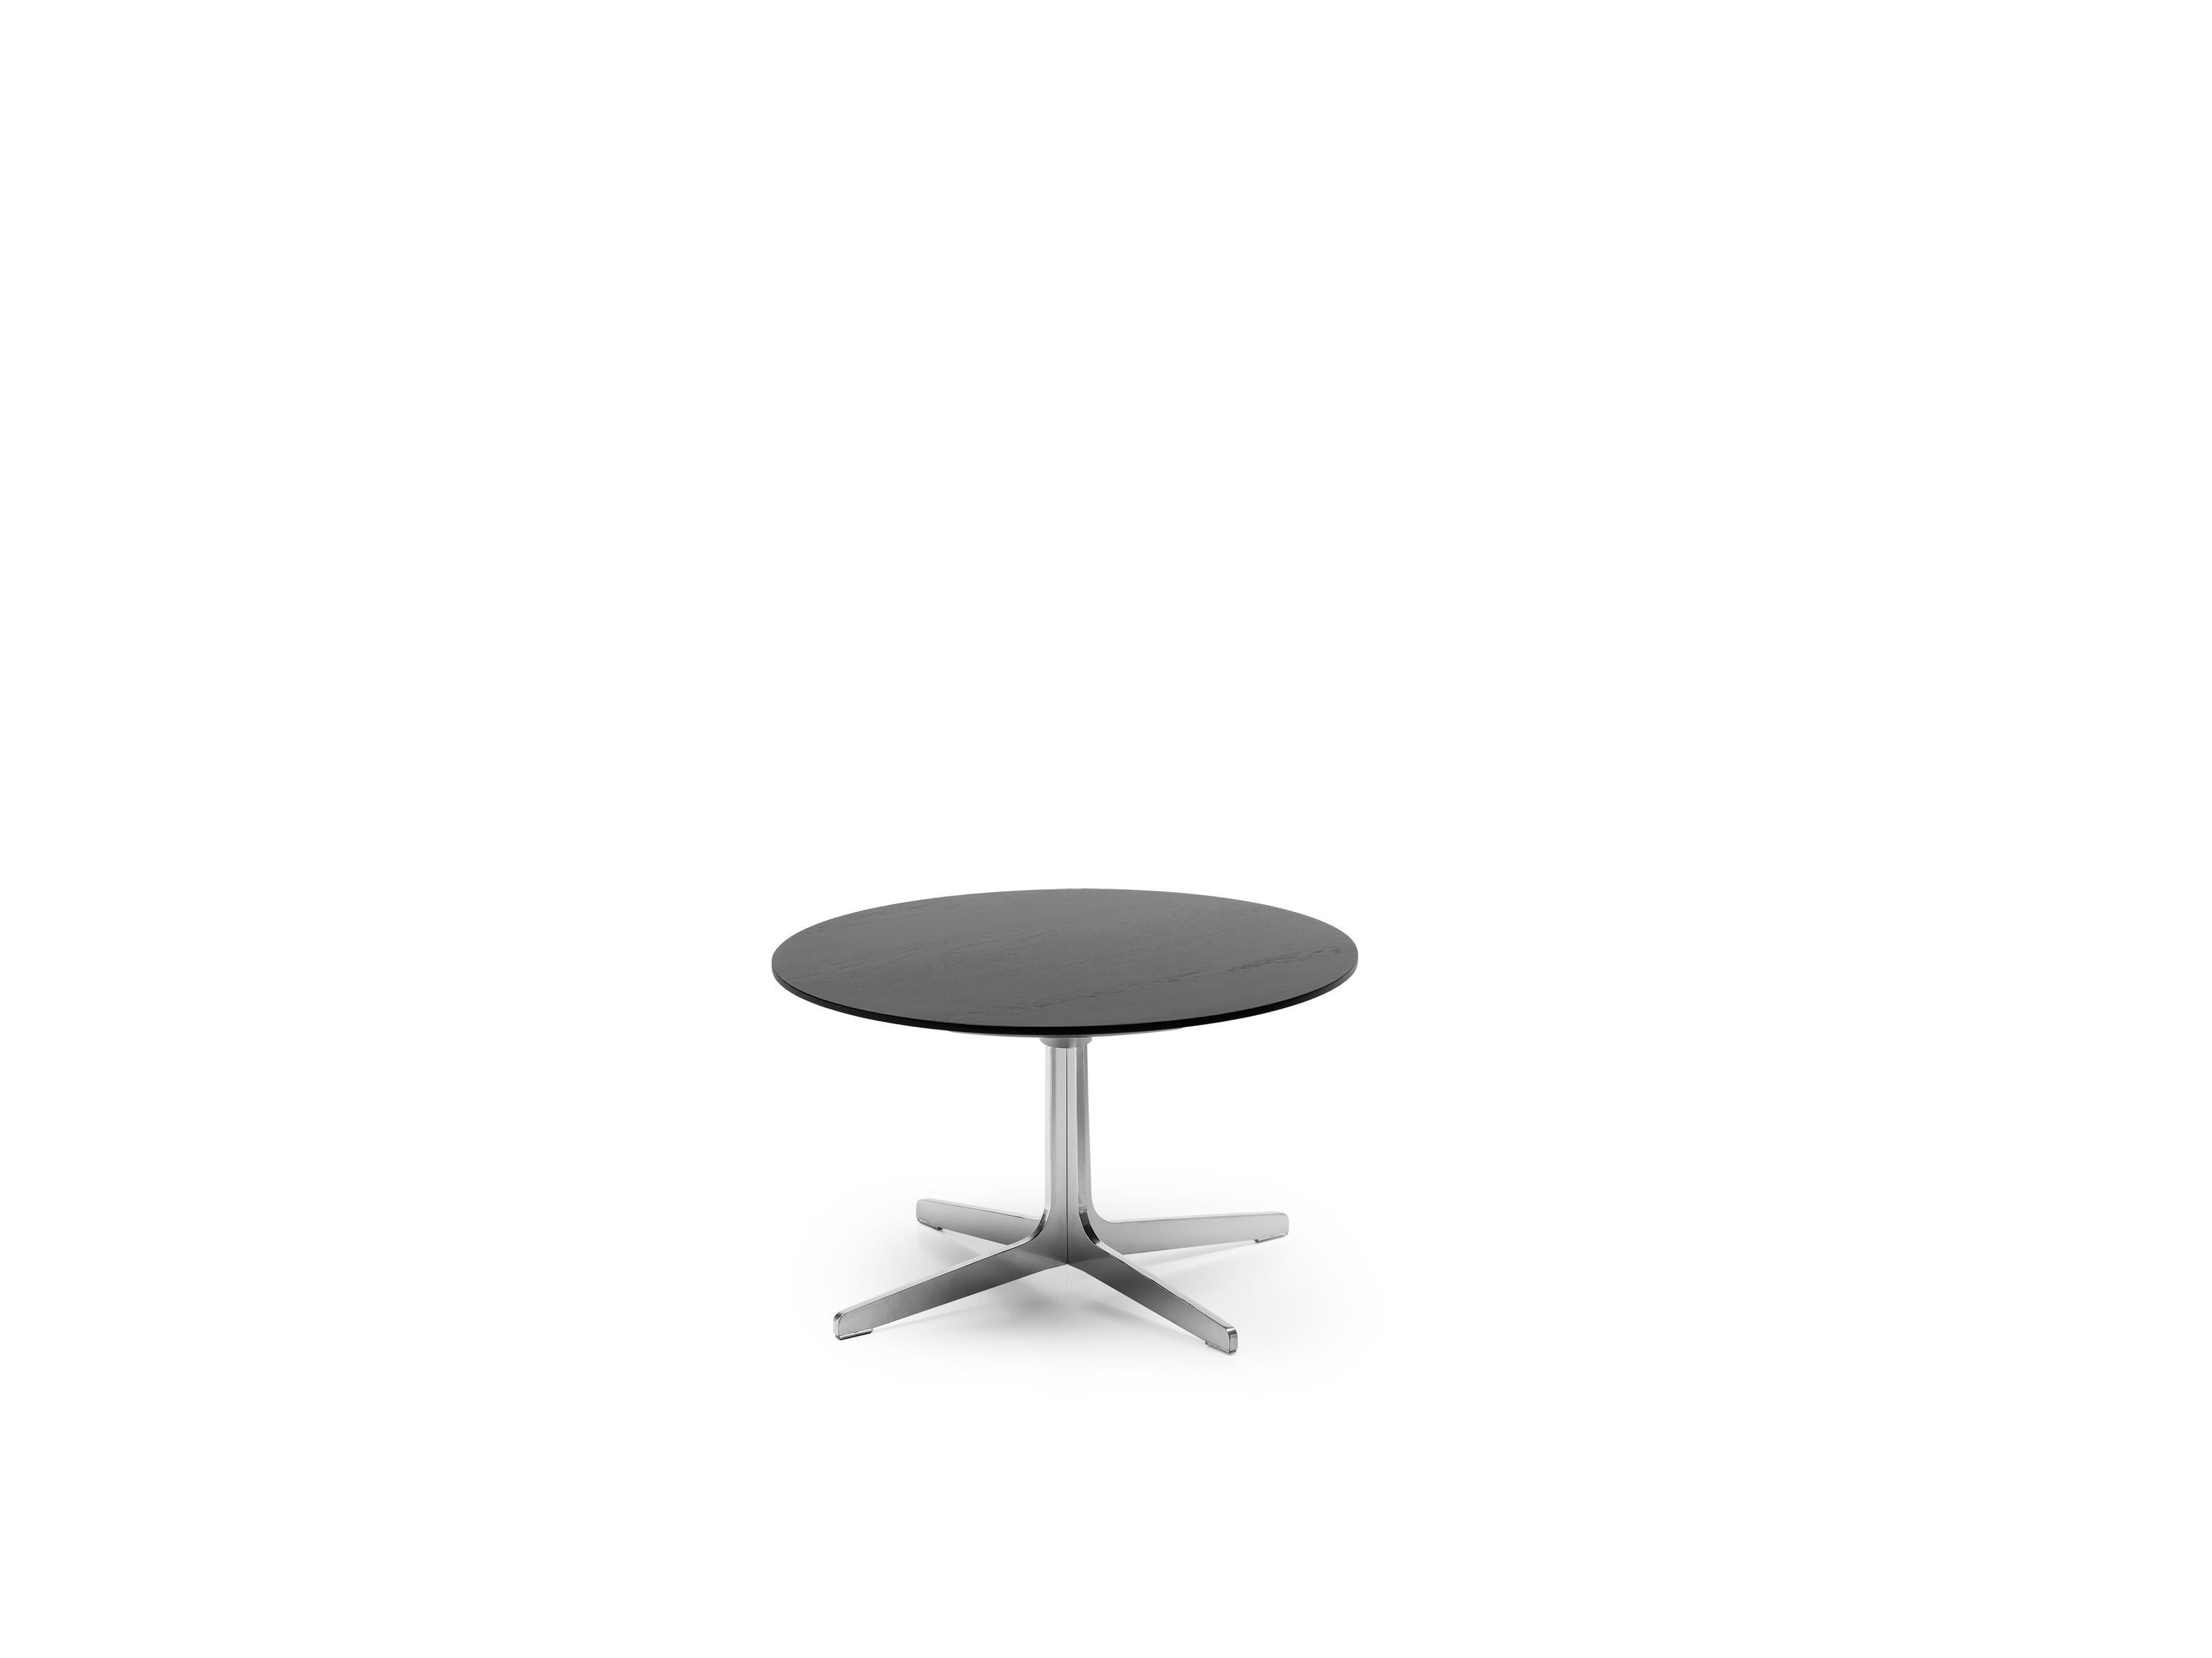 DS-144 Lounge Table by De Sede
Design: Werner Aisslinger
Dimensions: D 50 x W 61 x H 37 cm
Materials: high-gloss chrome-plated steel, nero oak

Prices may change according to the chosen materials and size. 

Sit the way you would sit in a racing